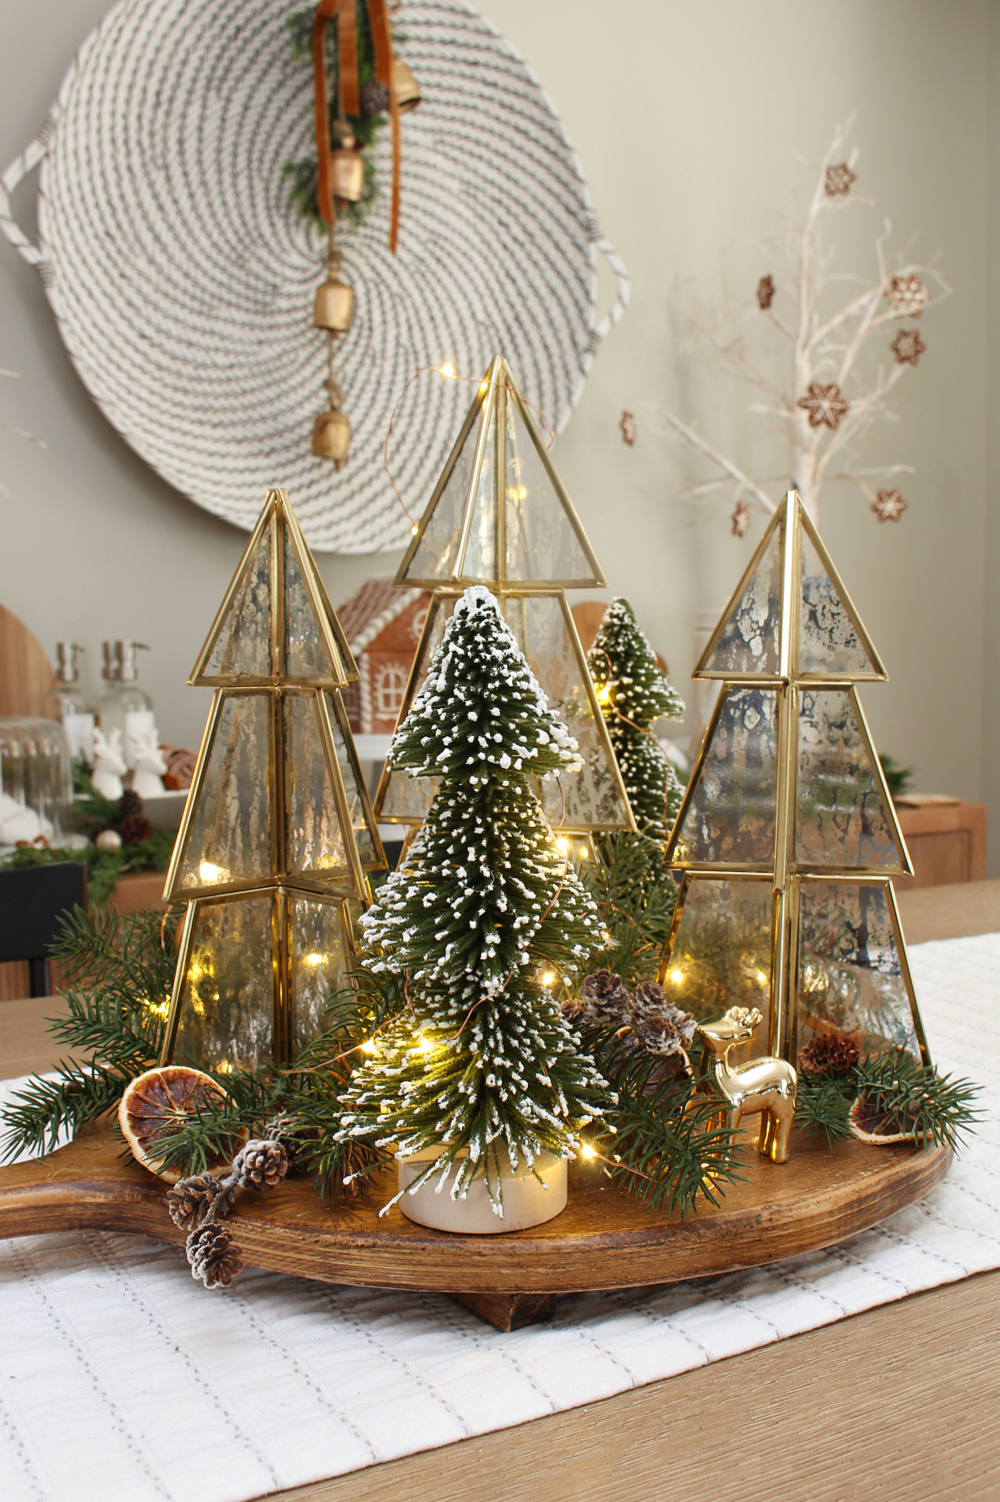 Cute Christmas centerpiece with gold and glass trees, greenery and twinkle lights.